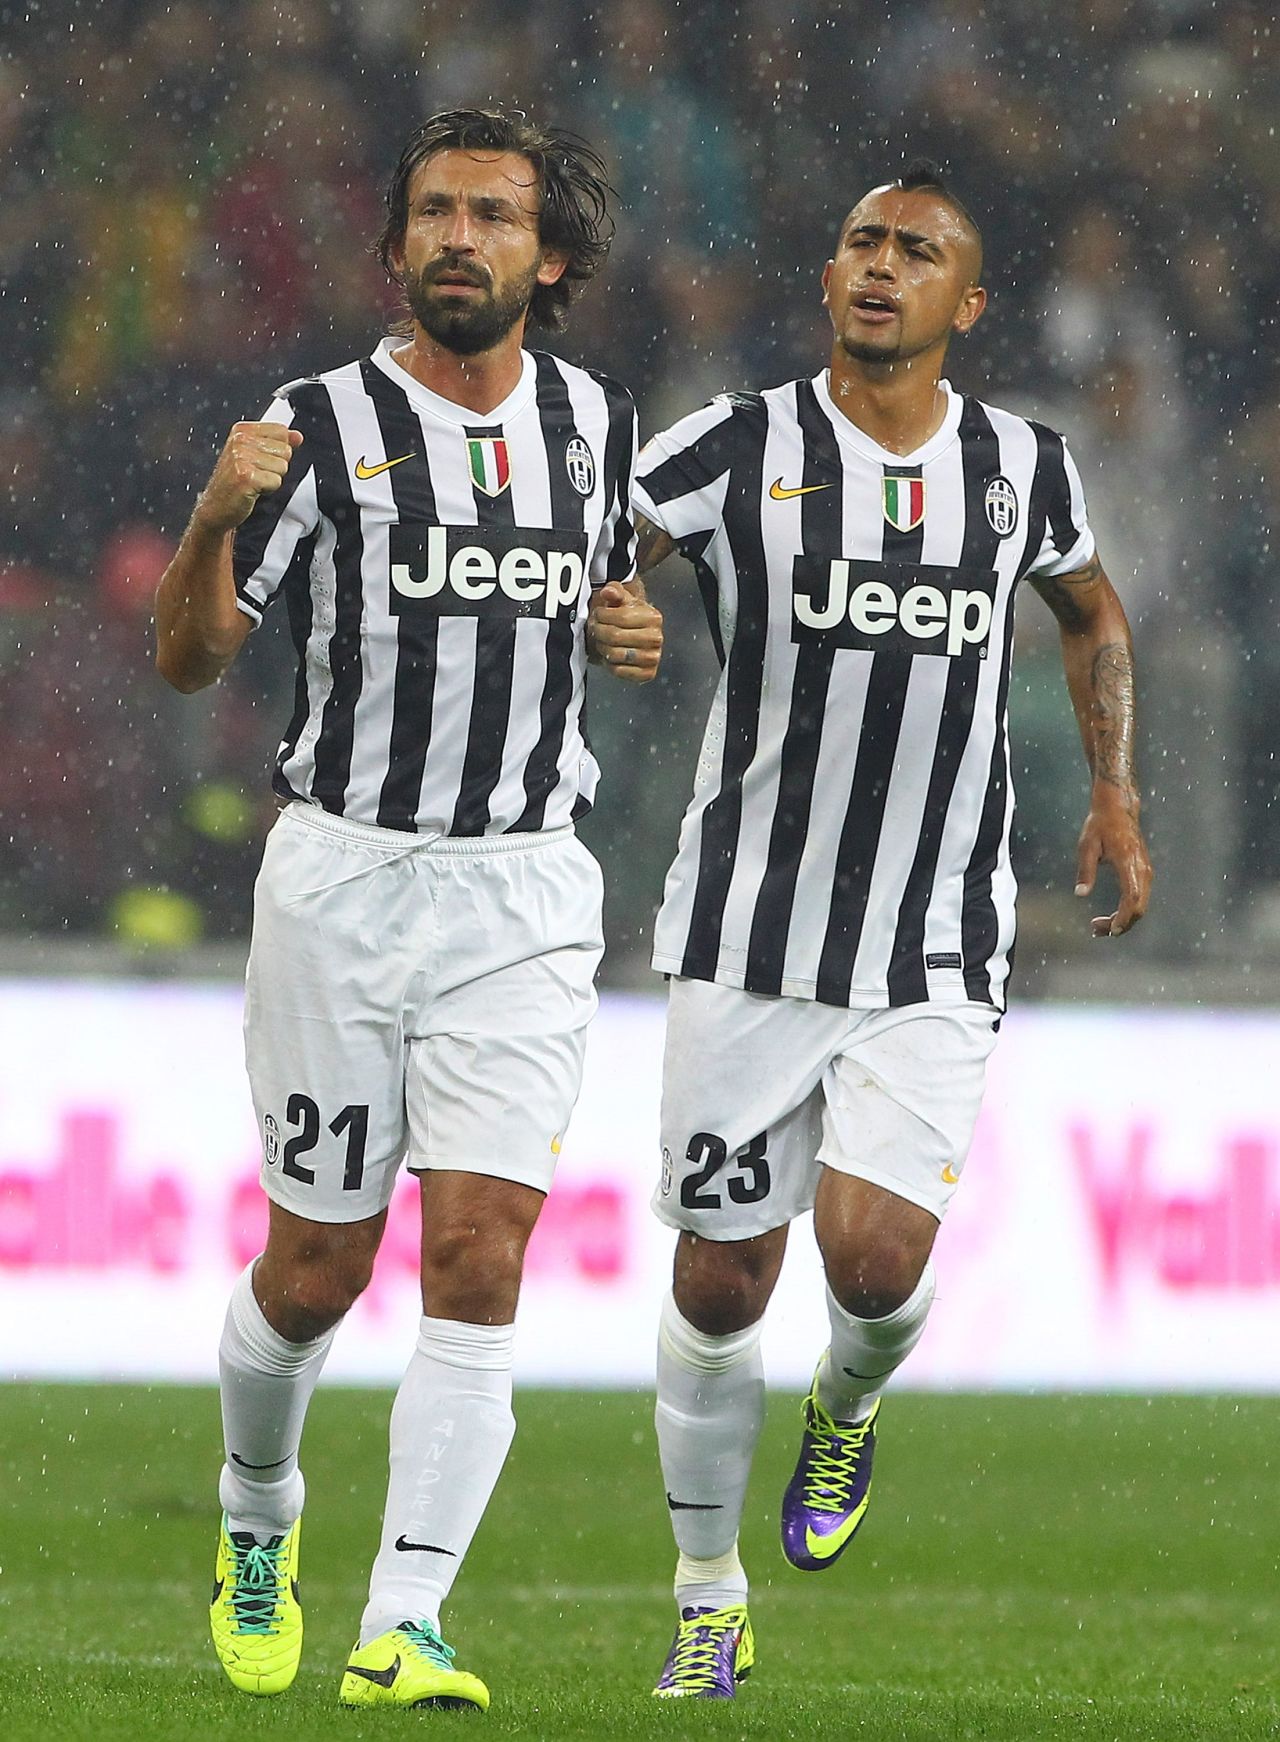 Juventus have cemented their place as the dominant force in Italian football by winning the last two Serie A titles. Their move to a new stadium in 2011 helped boost revenue and they made the most money out of the European Champions League in 2013 despite only reaching the quarterfinals. They saw a big rise in total revenue to $369 million.